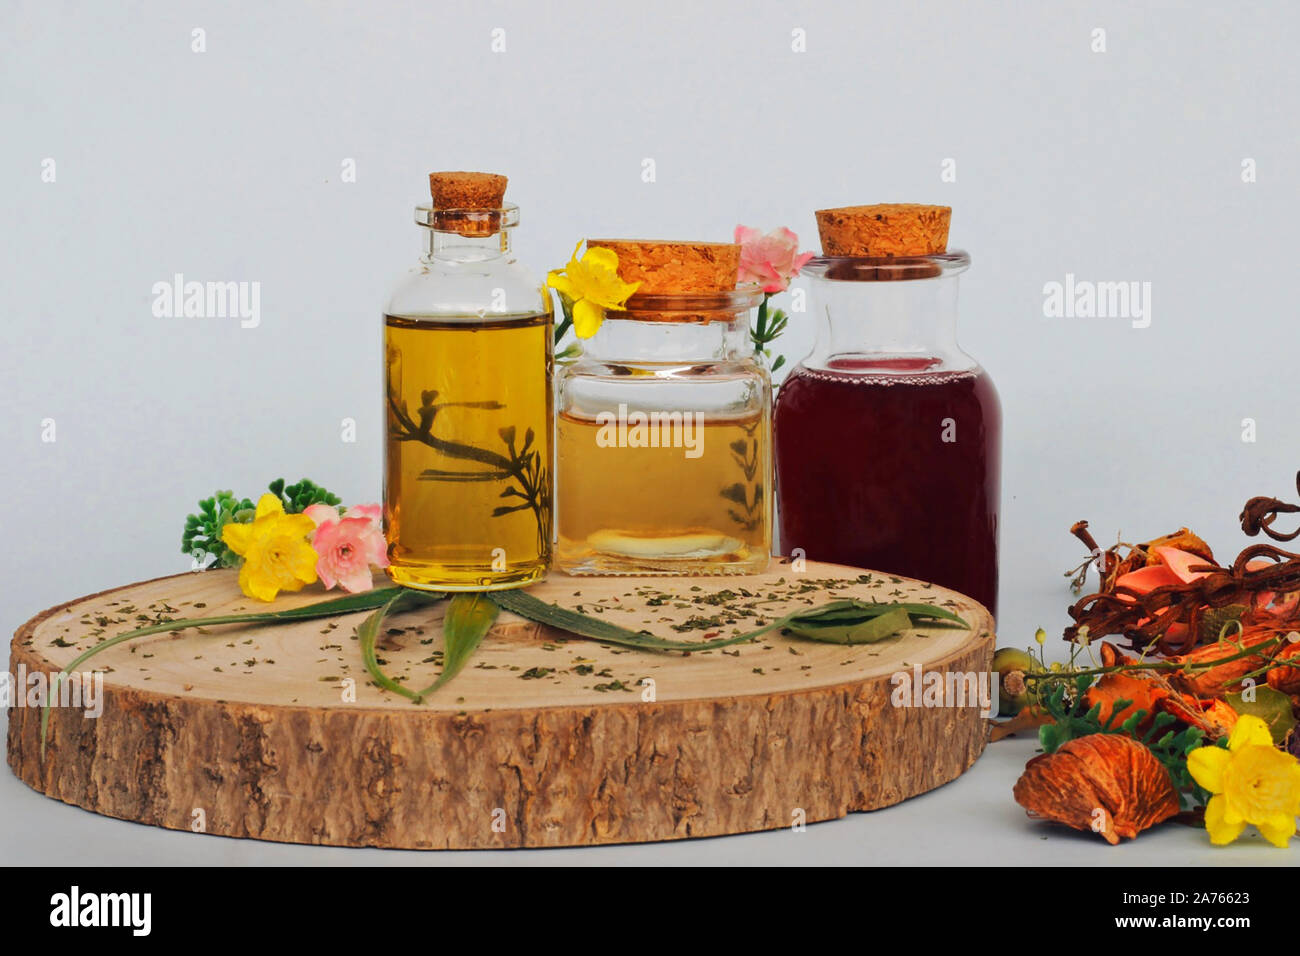 Natural Medicine: Selection of 3 jars with essential oils with wildflowers and plants. Alternative Medicine that respects the environment. Stock Photo